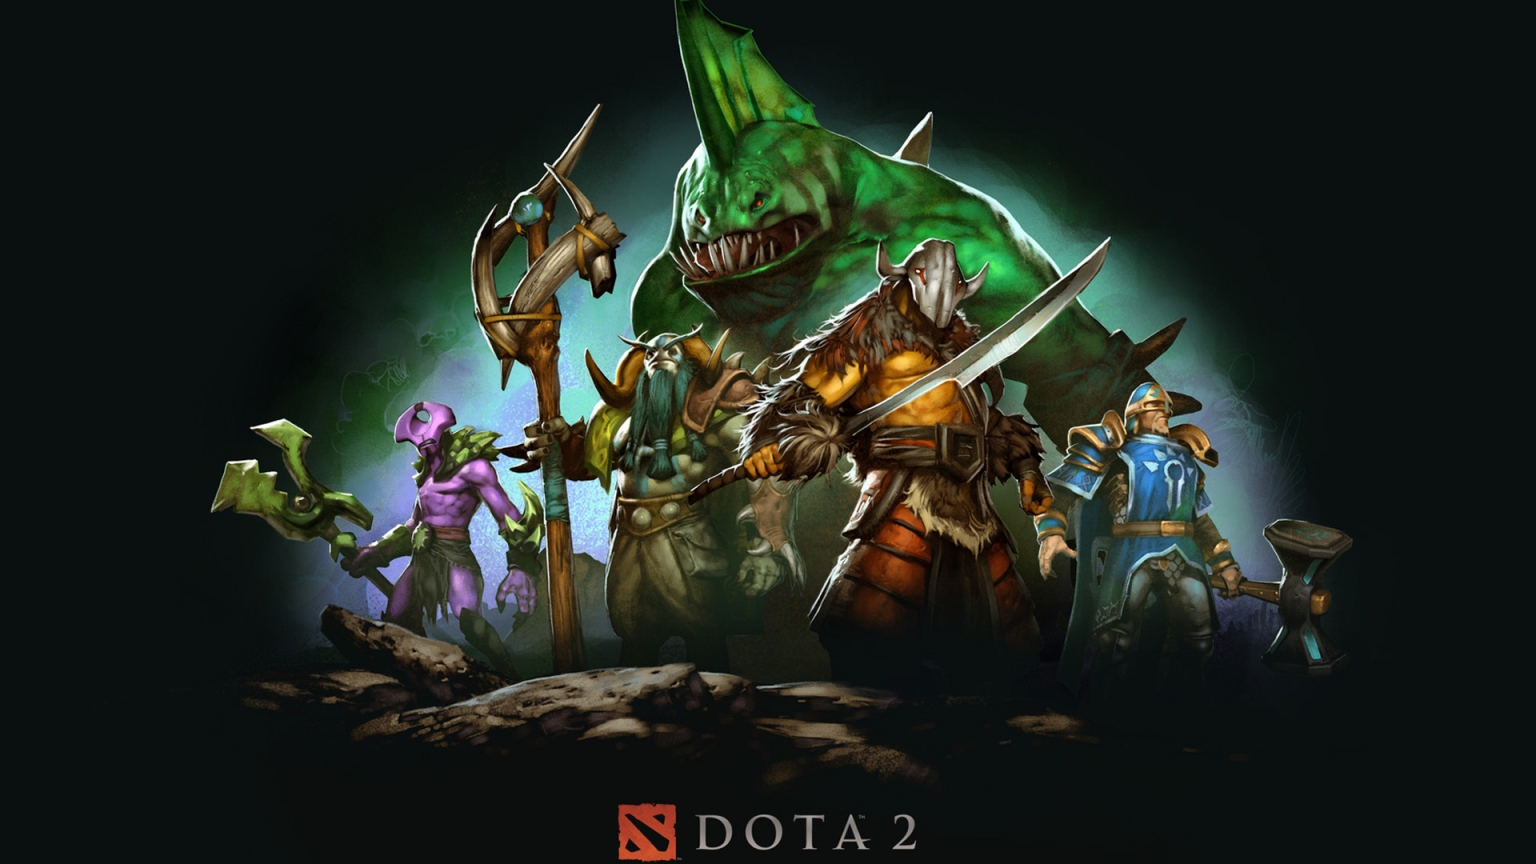 Dota 2 Characters for 1536 x 864 HDTV resolution